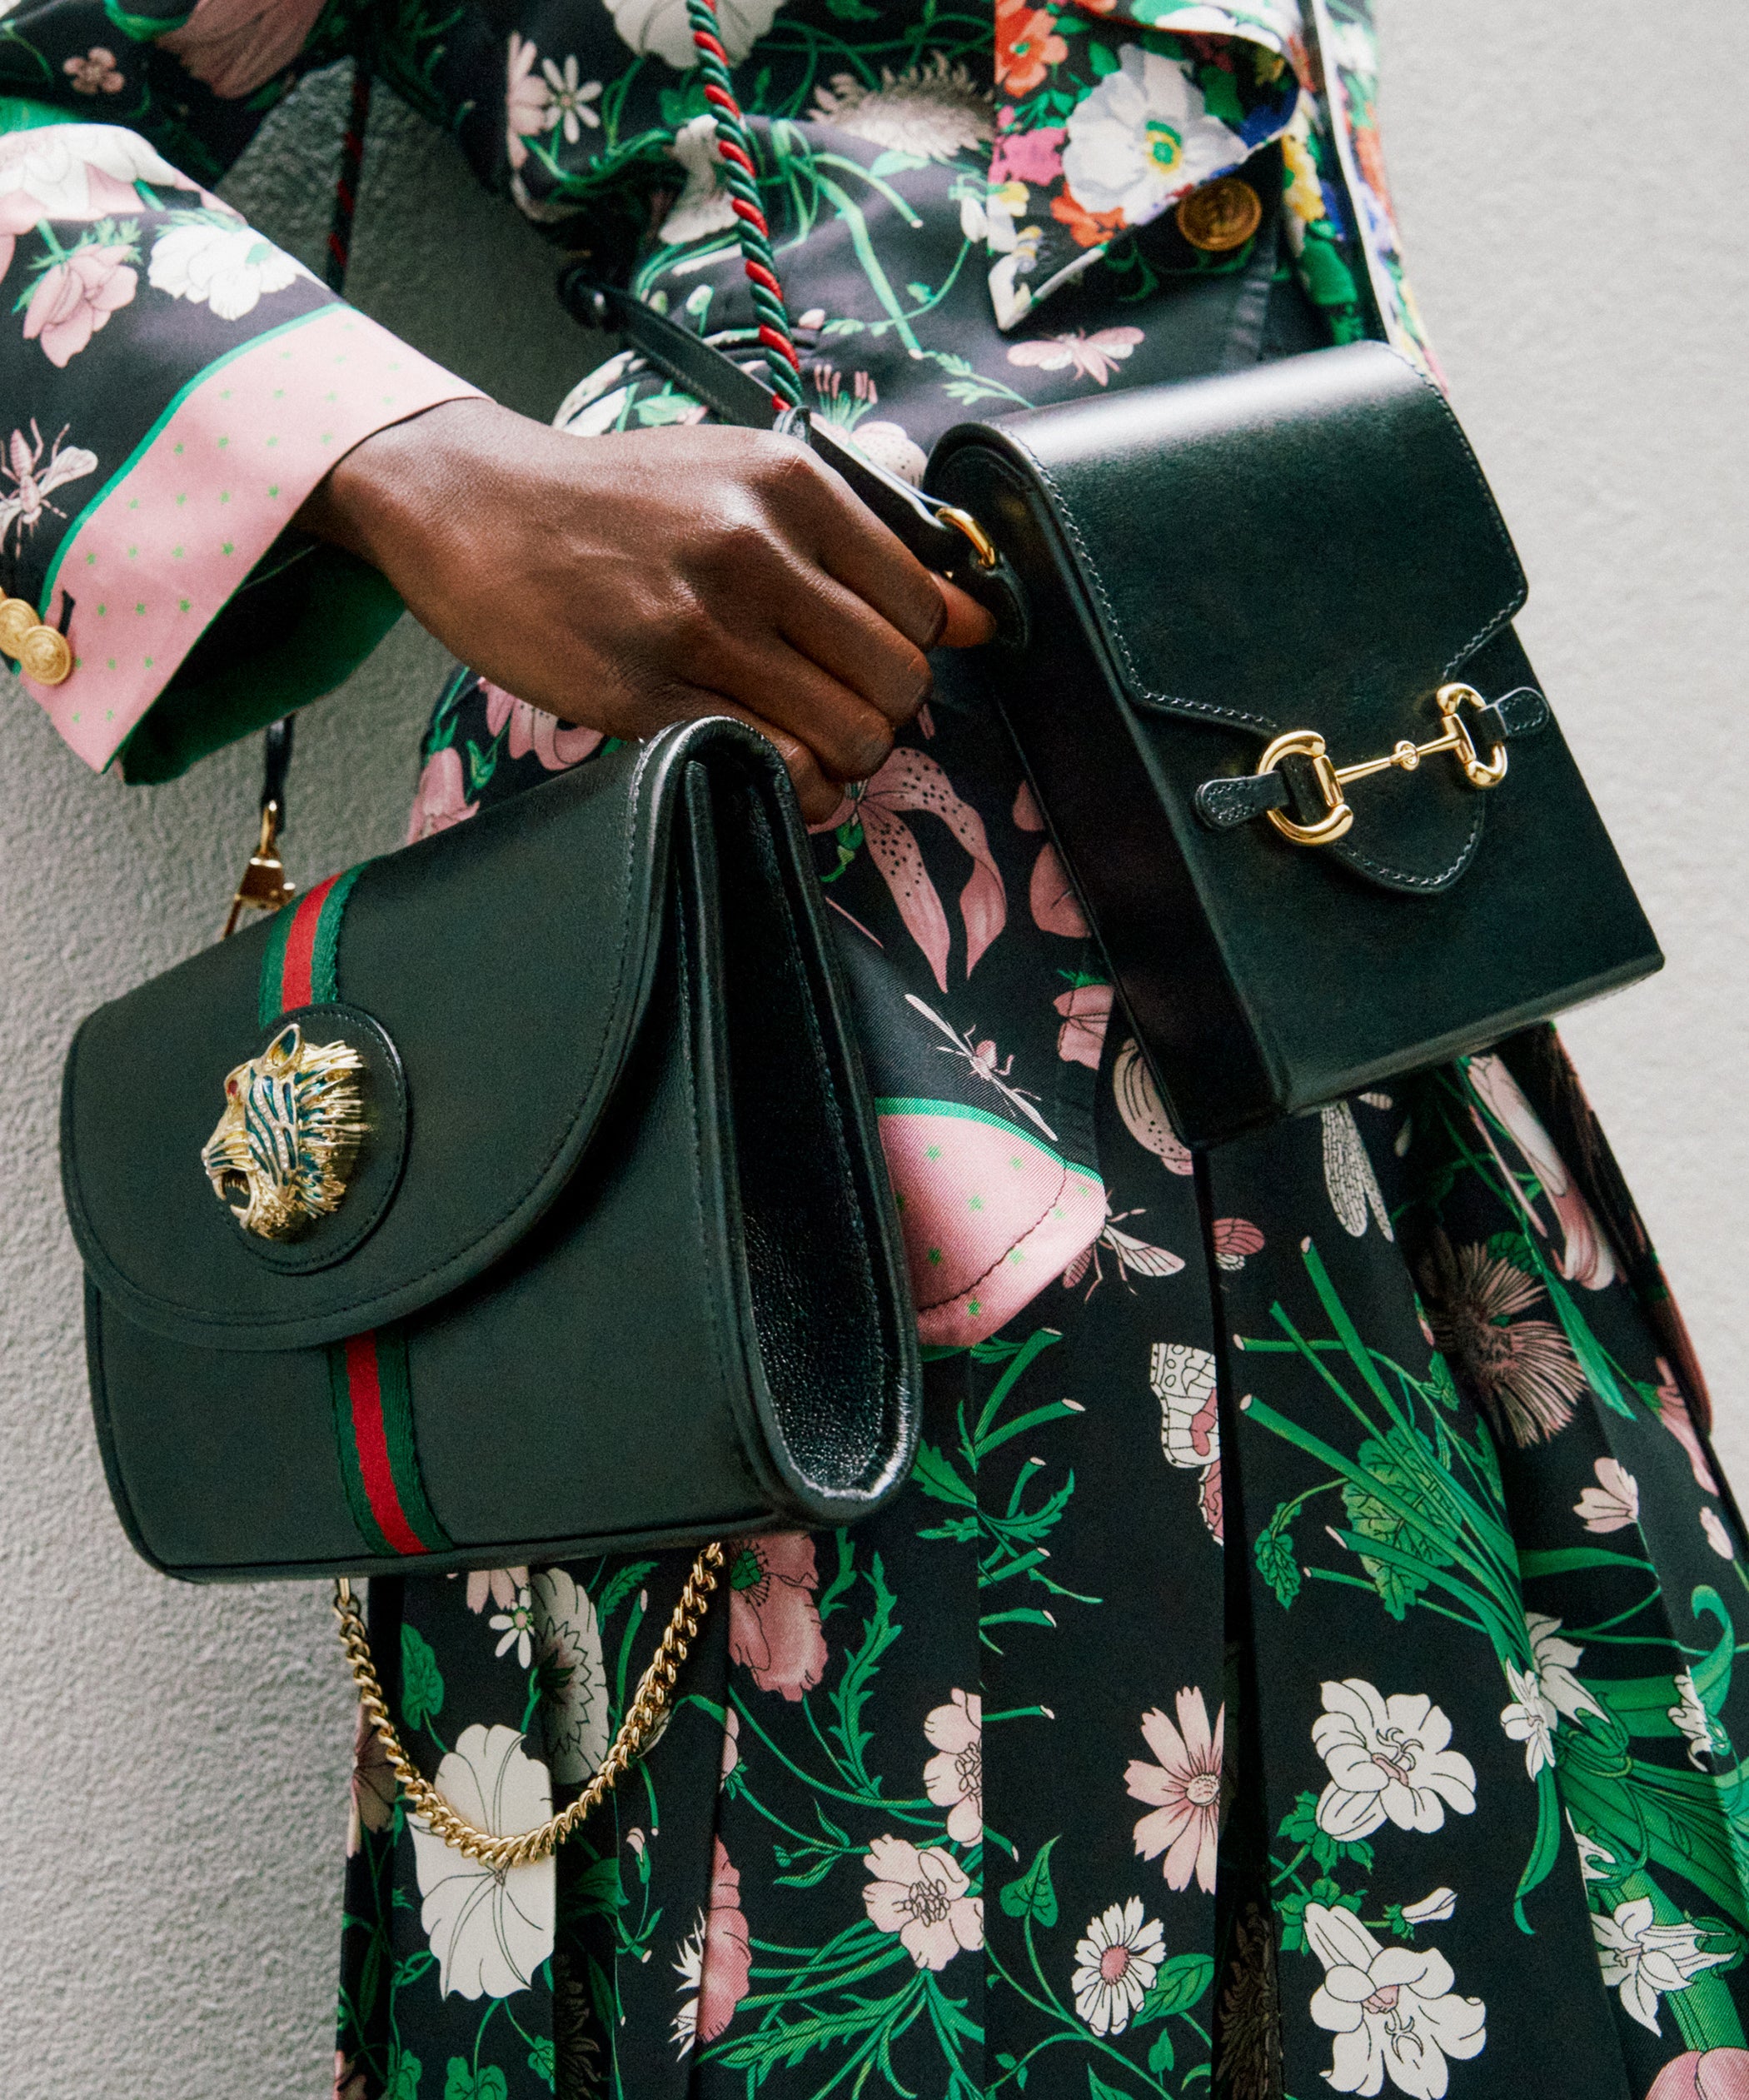 How to Get in on the Luxury-Handbag Consignment Trend